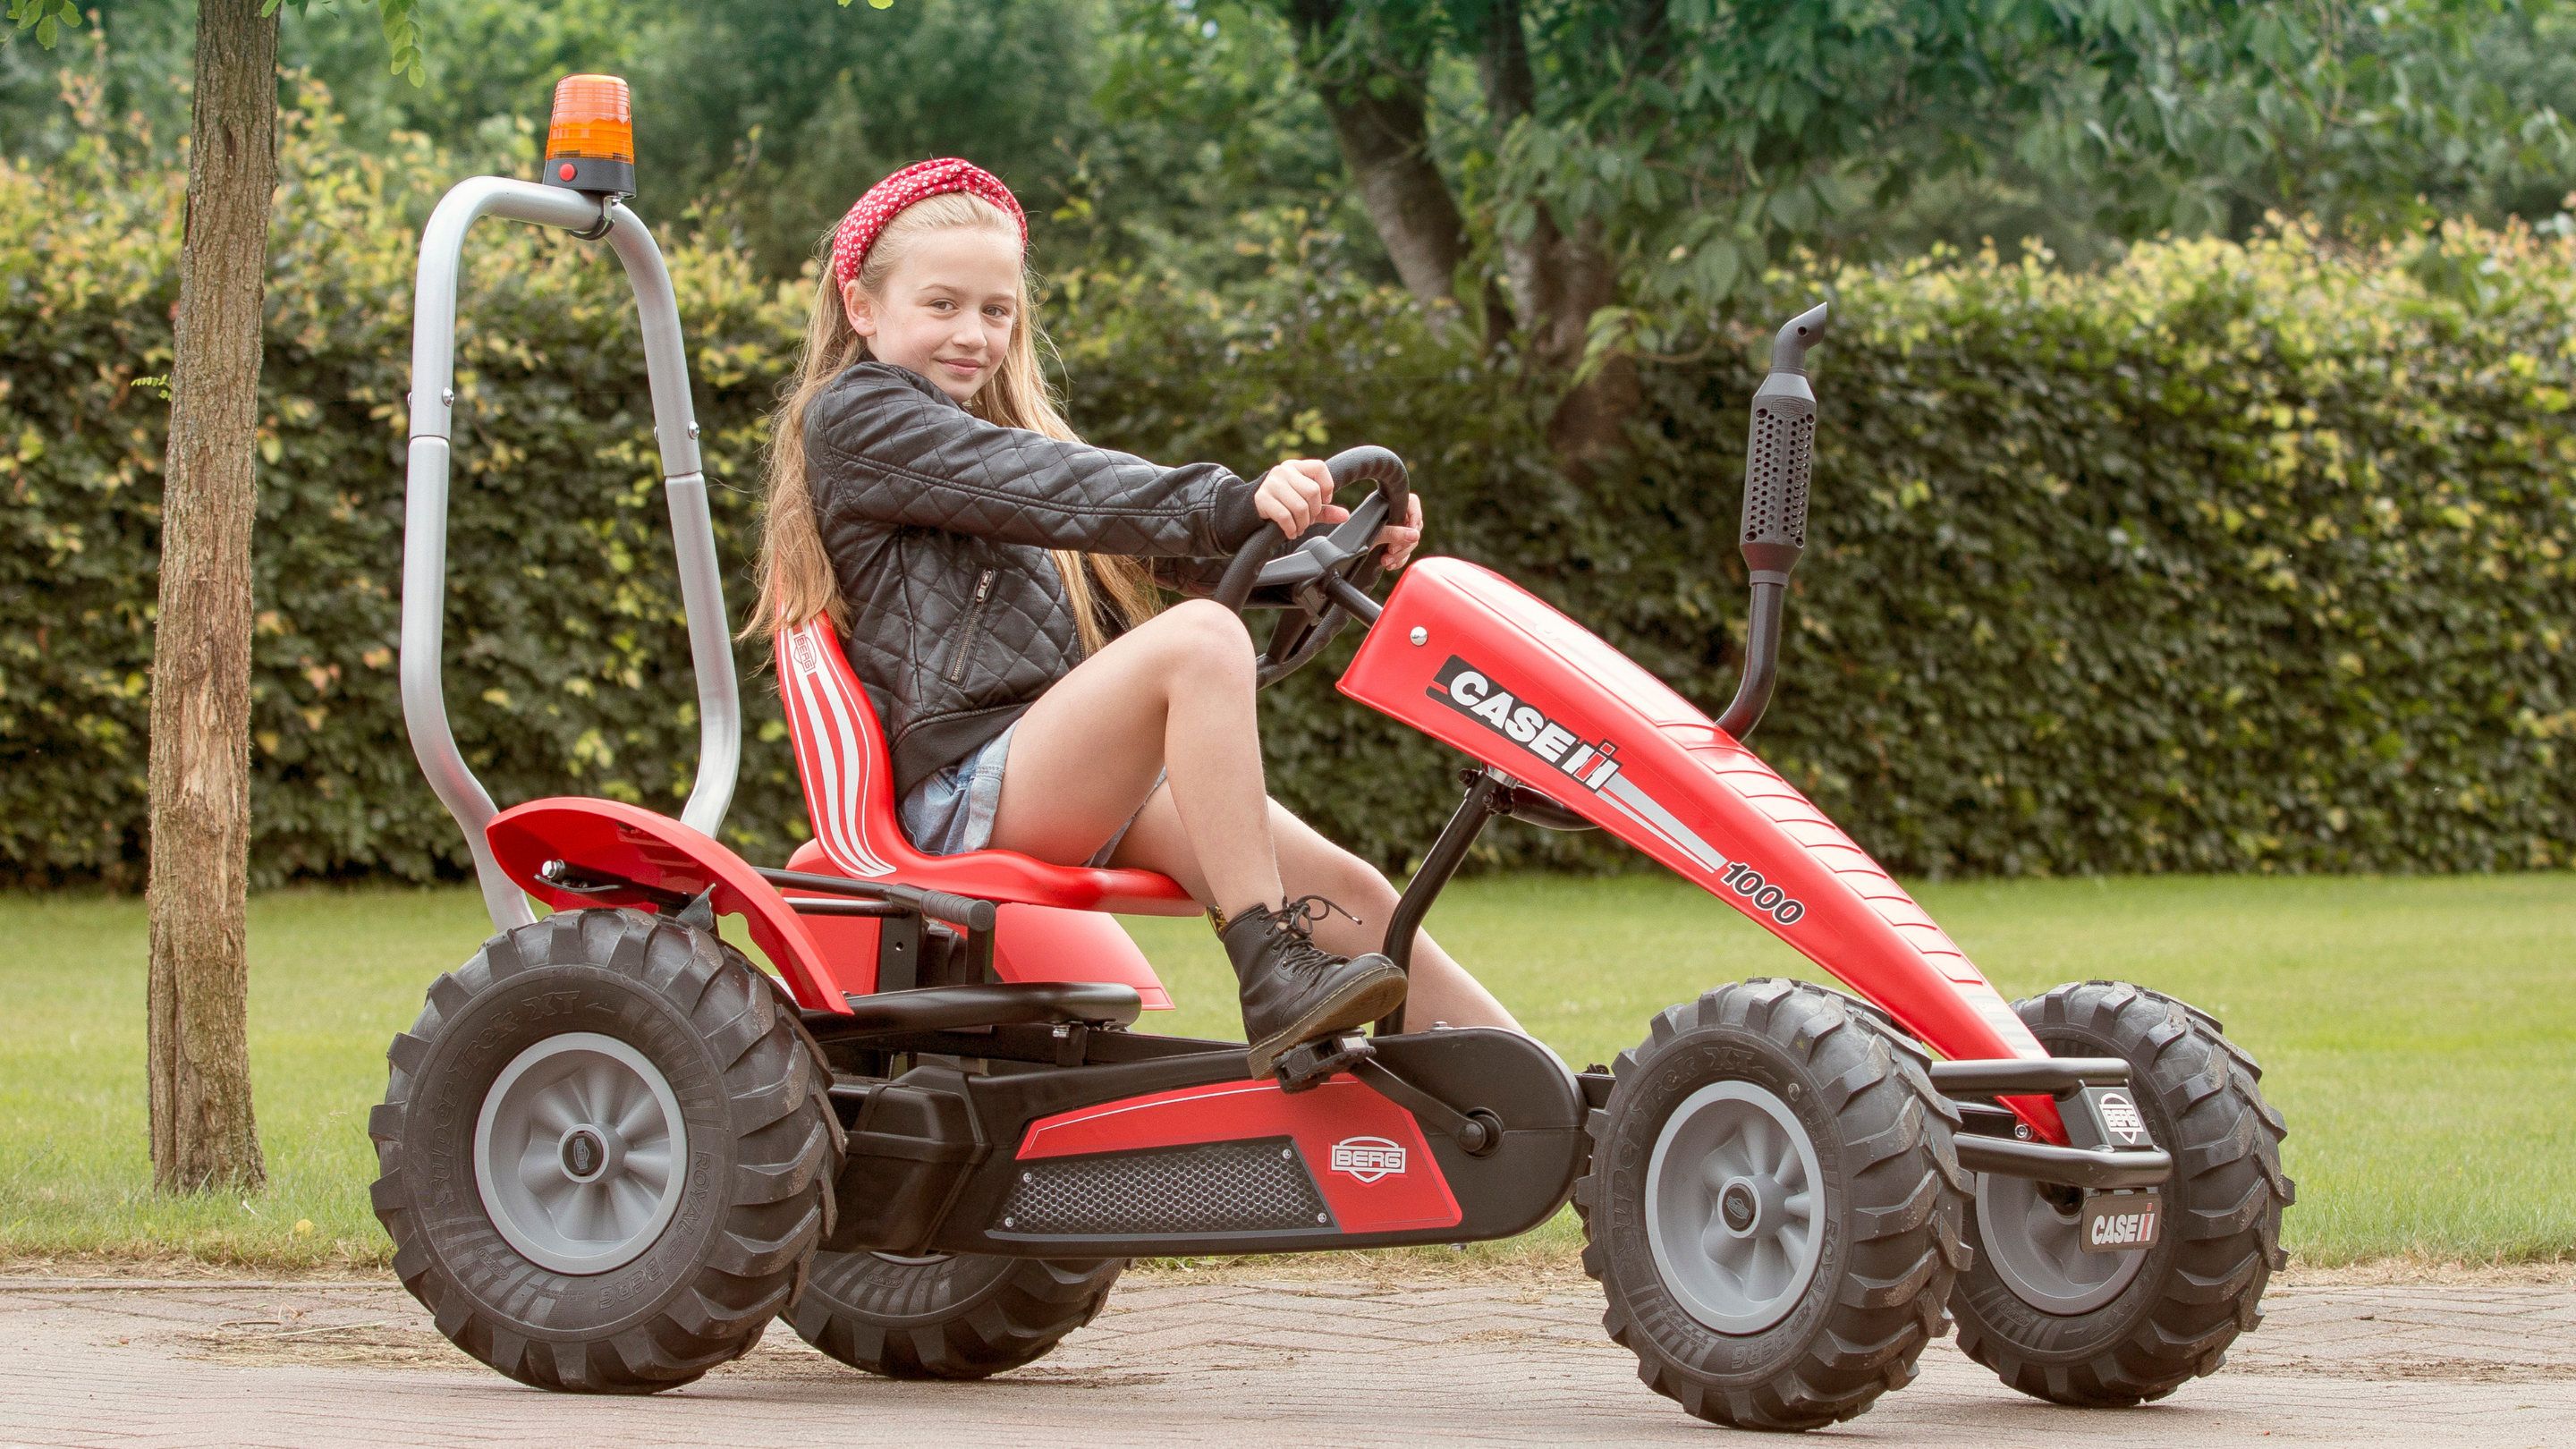 BERG Specials & Farm Pedal Karts for Age 5-99 Years Old – Superior Karts